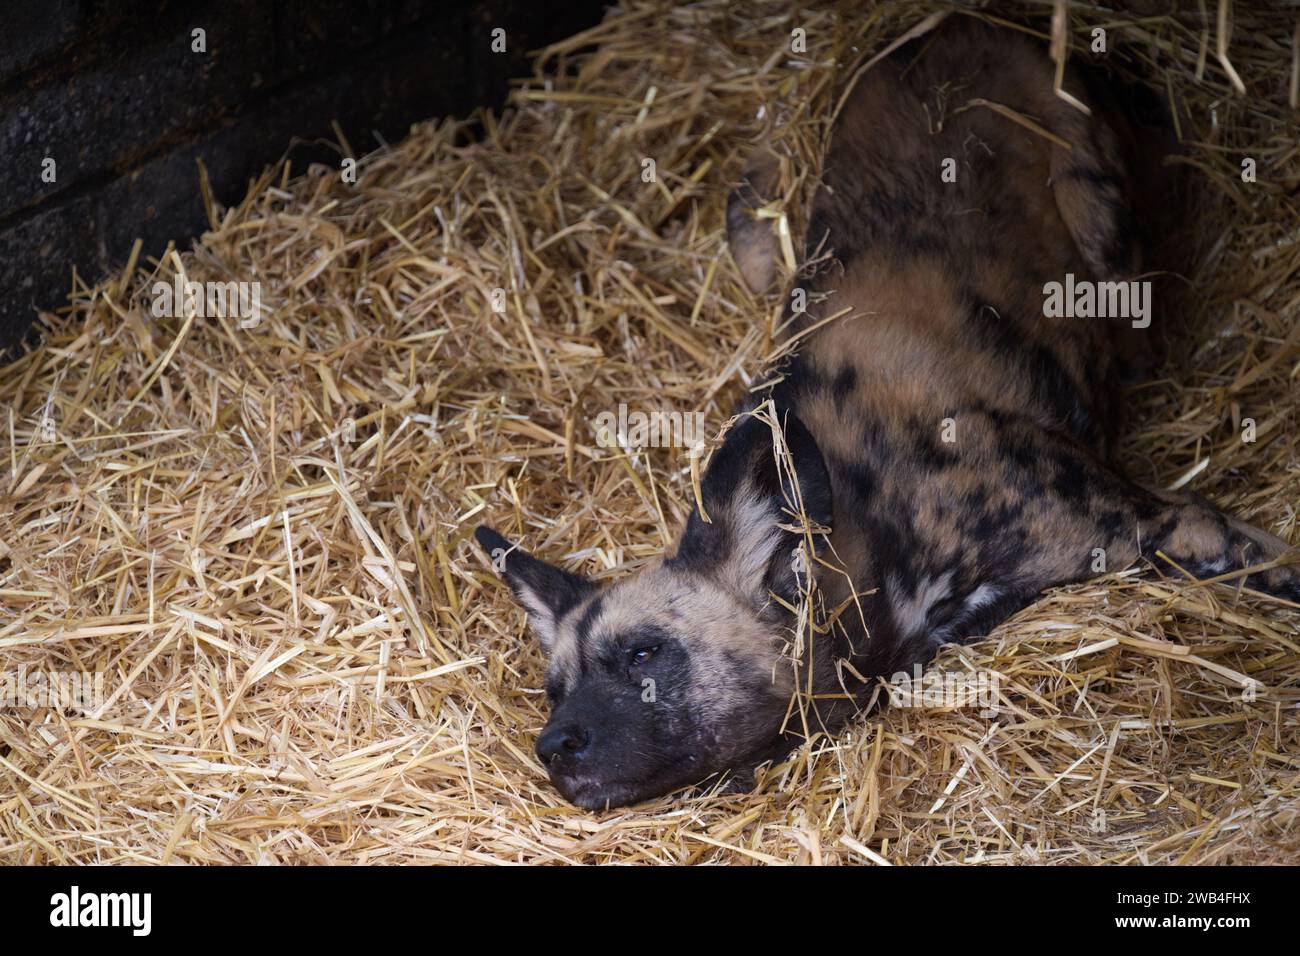 An African wild dog subbing it's scent onto straw at London Zoo Stock Photo